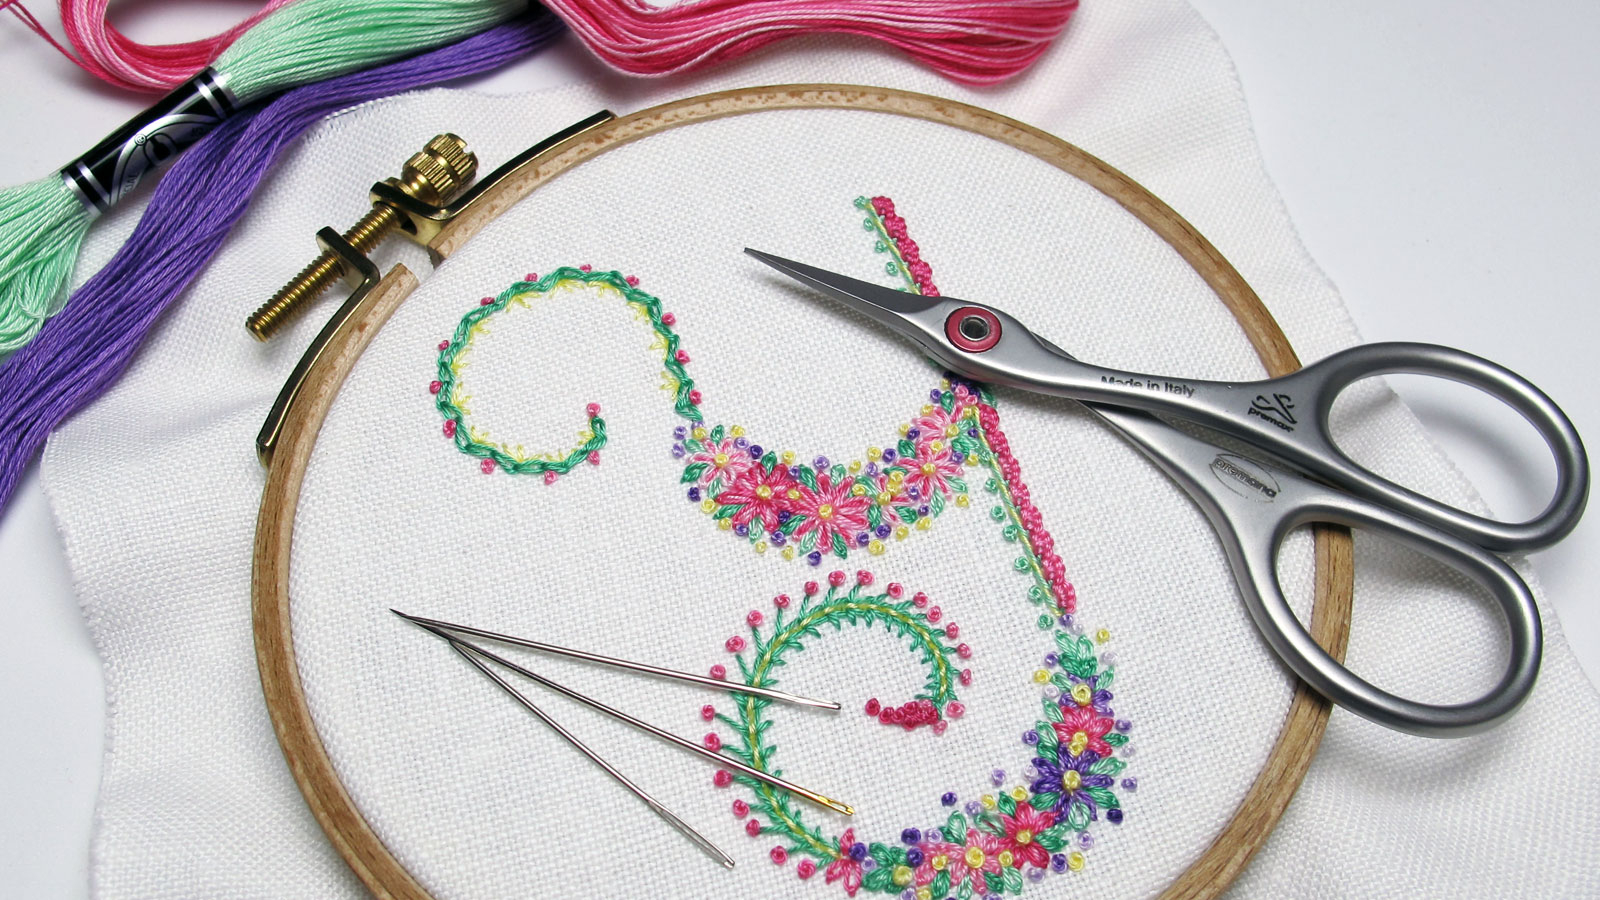 Free Embroidery Alphabet Patterns Needlenthread Tips Tricks And Great Resources For Hand Embroidery